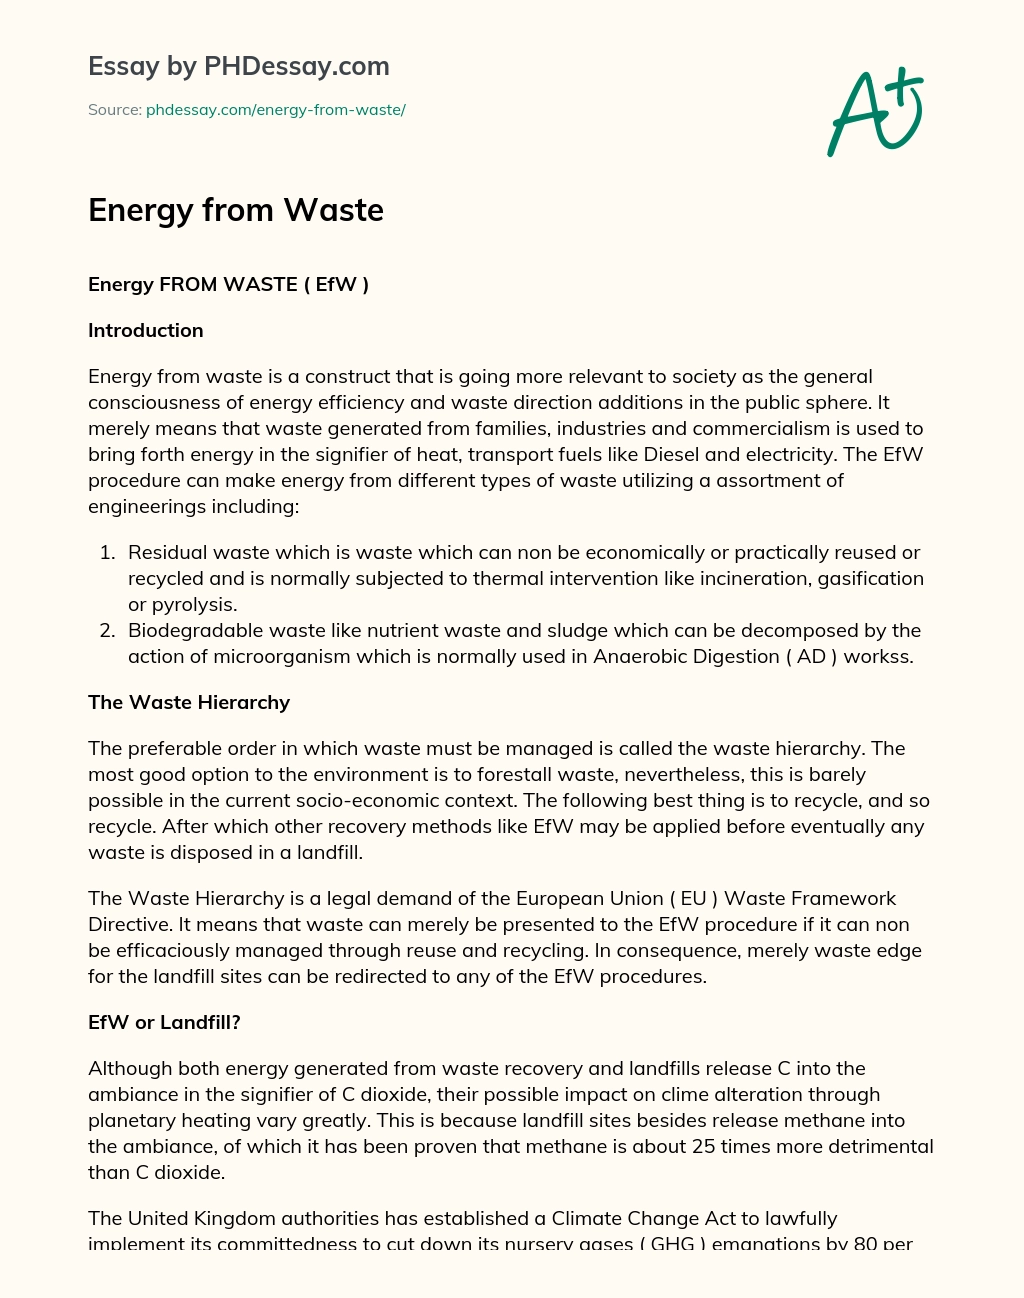 Energy from Waste essay